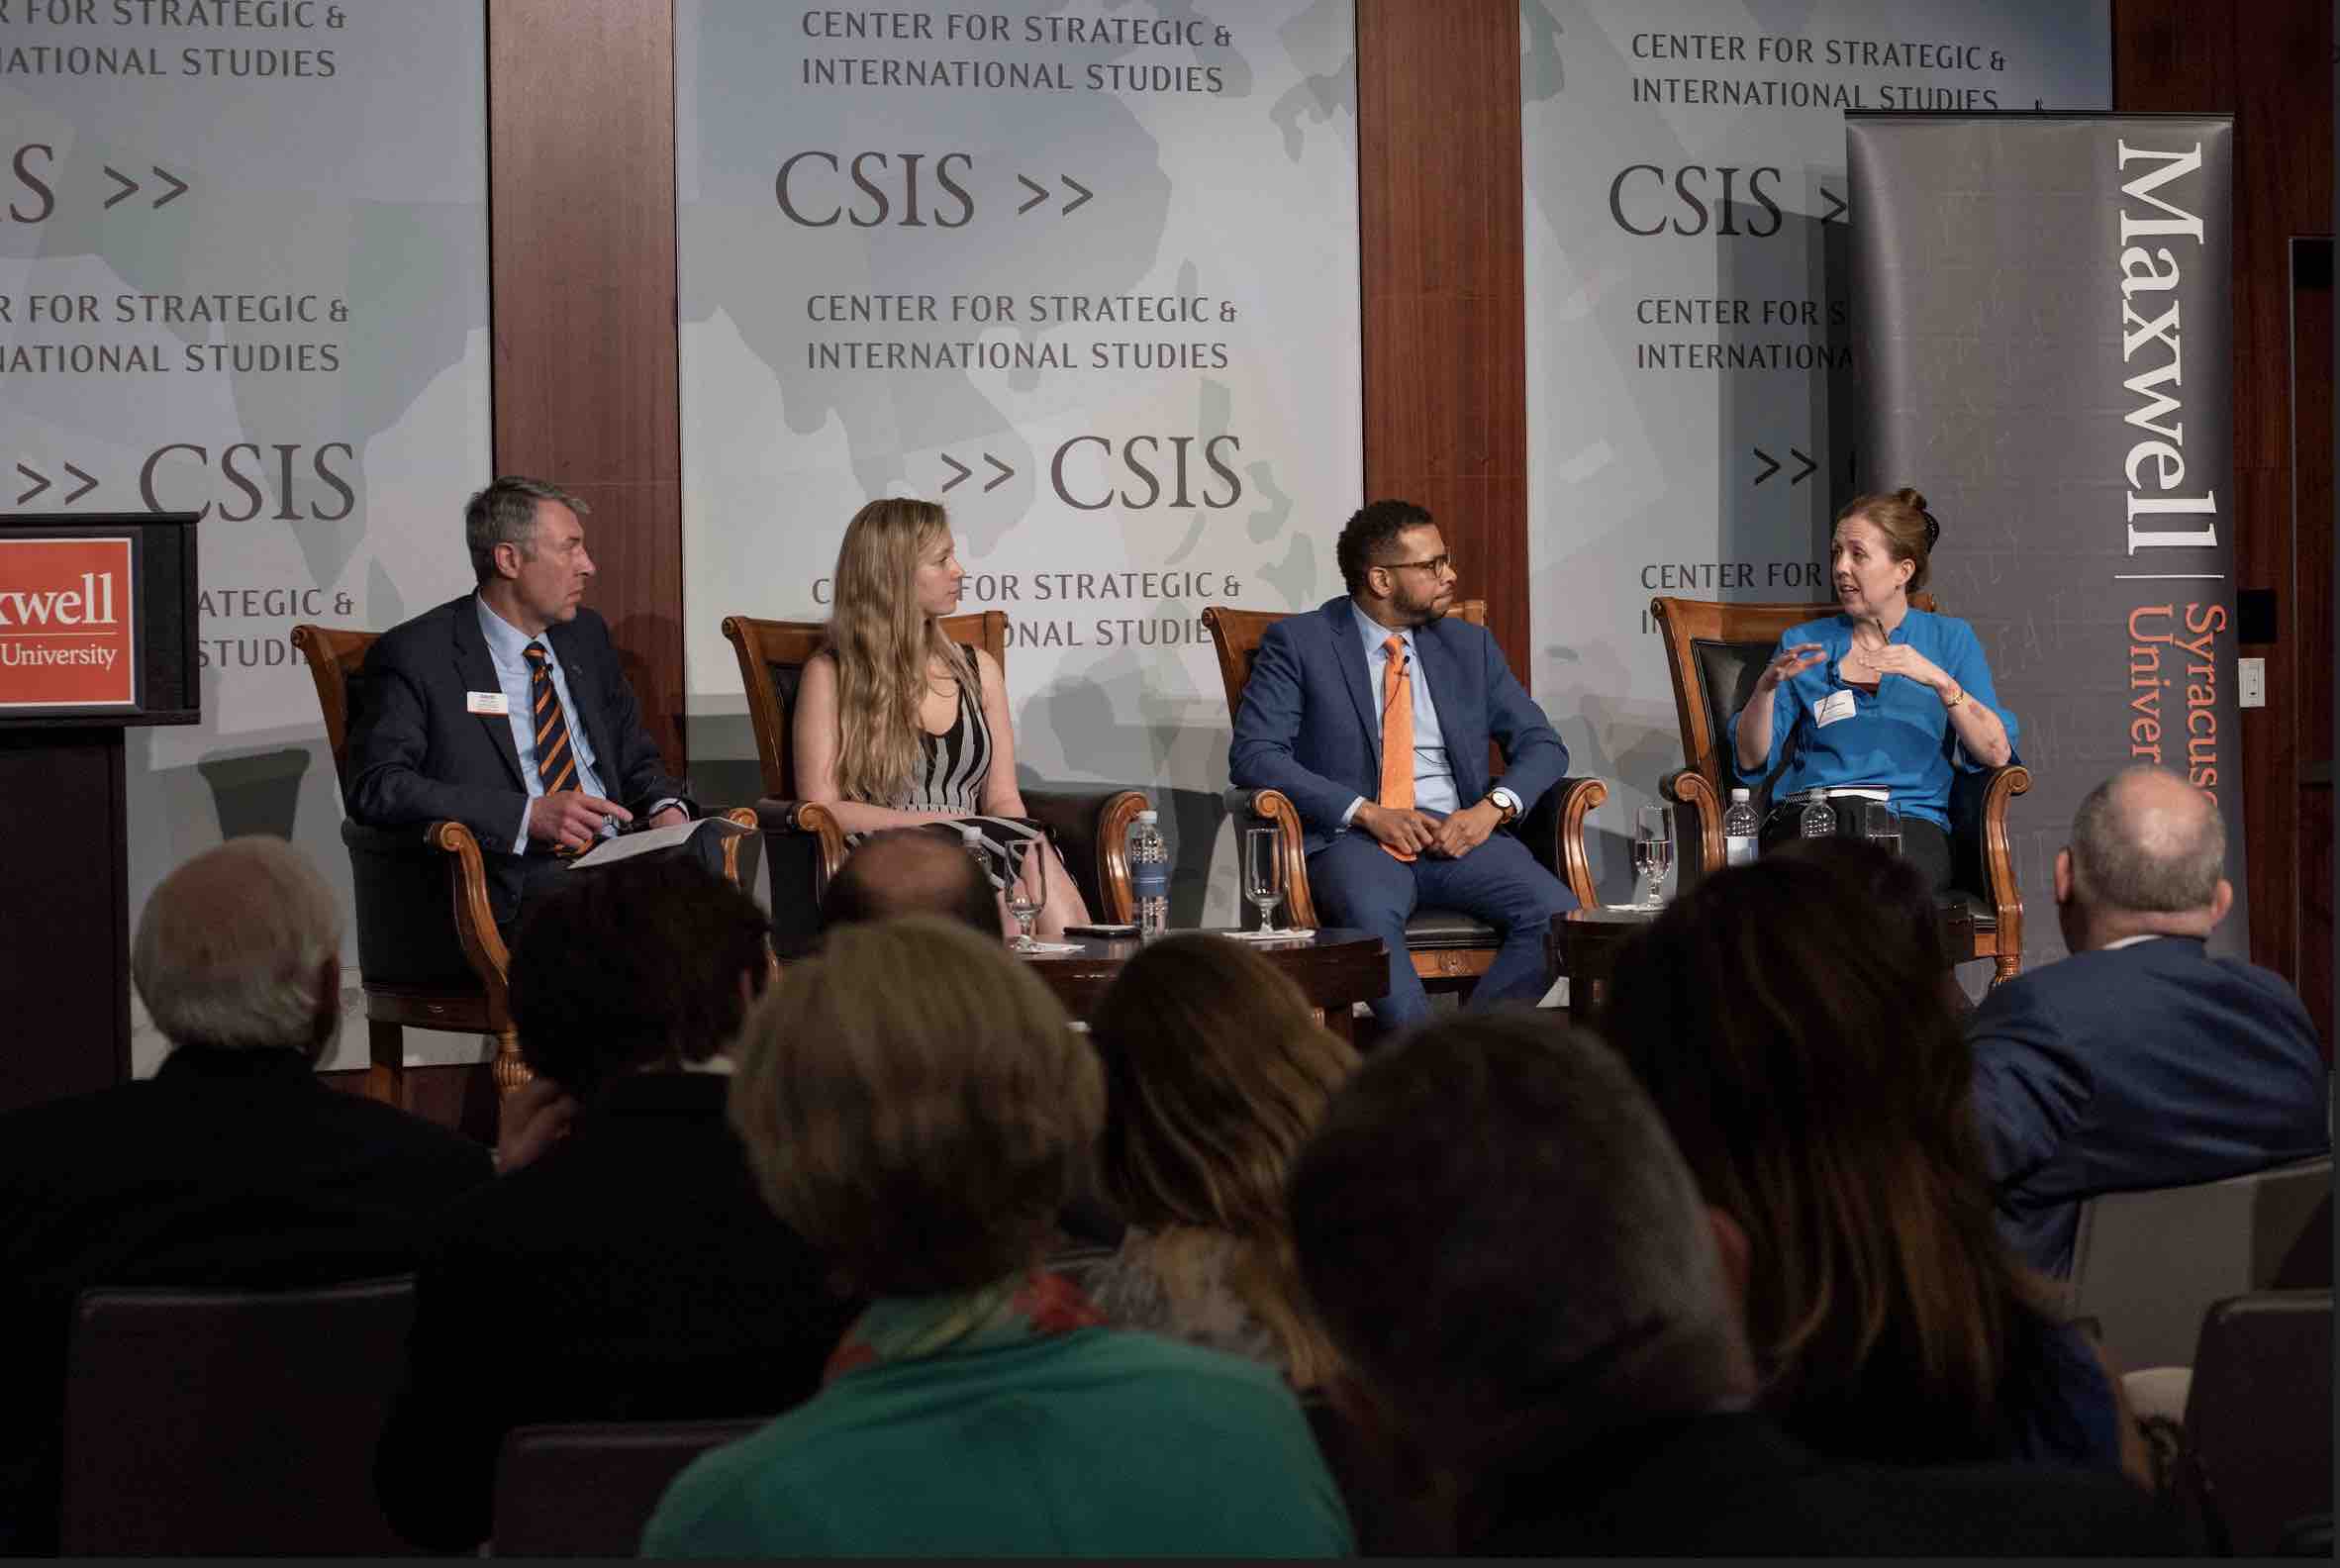 CSIS presentation with panel discussion on stage